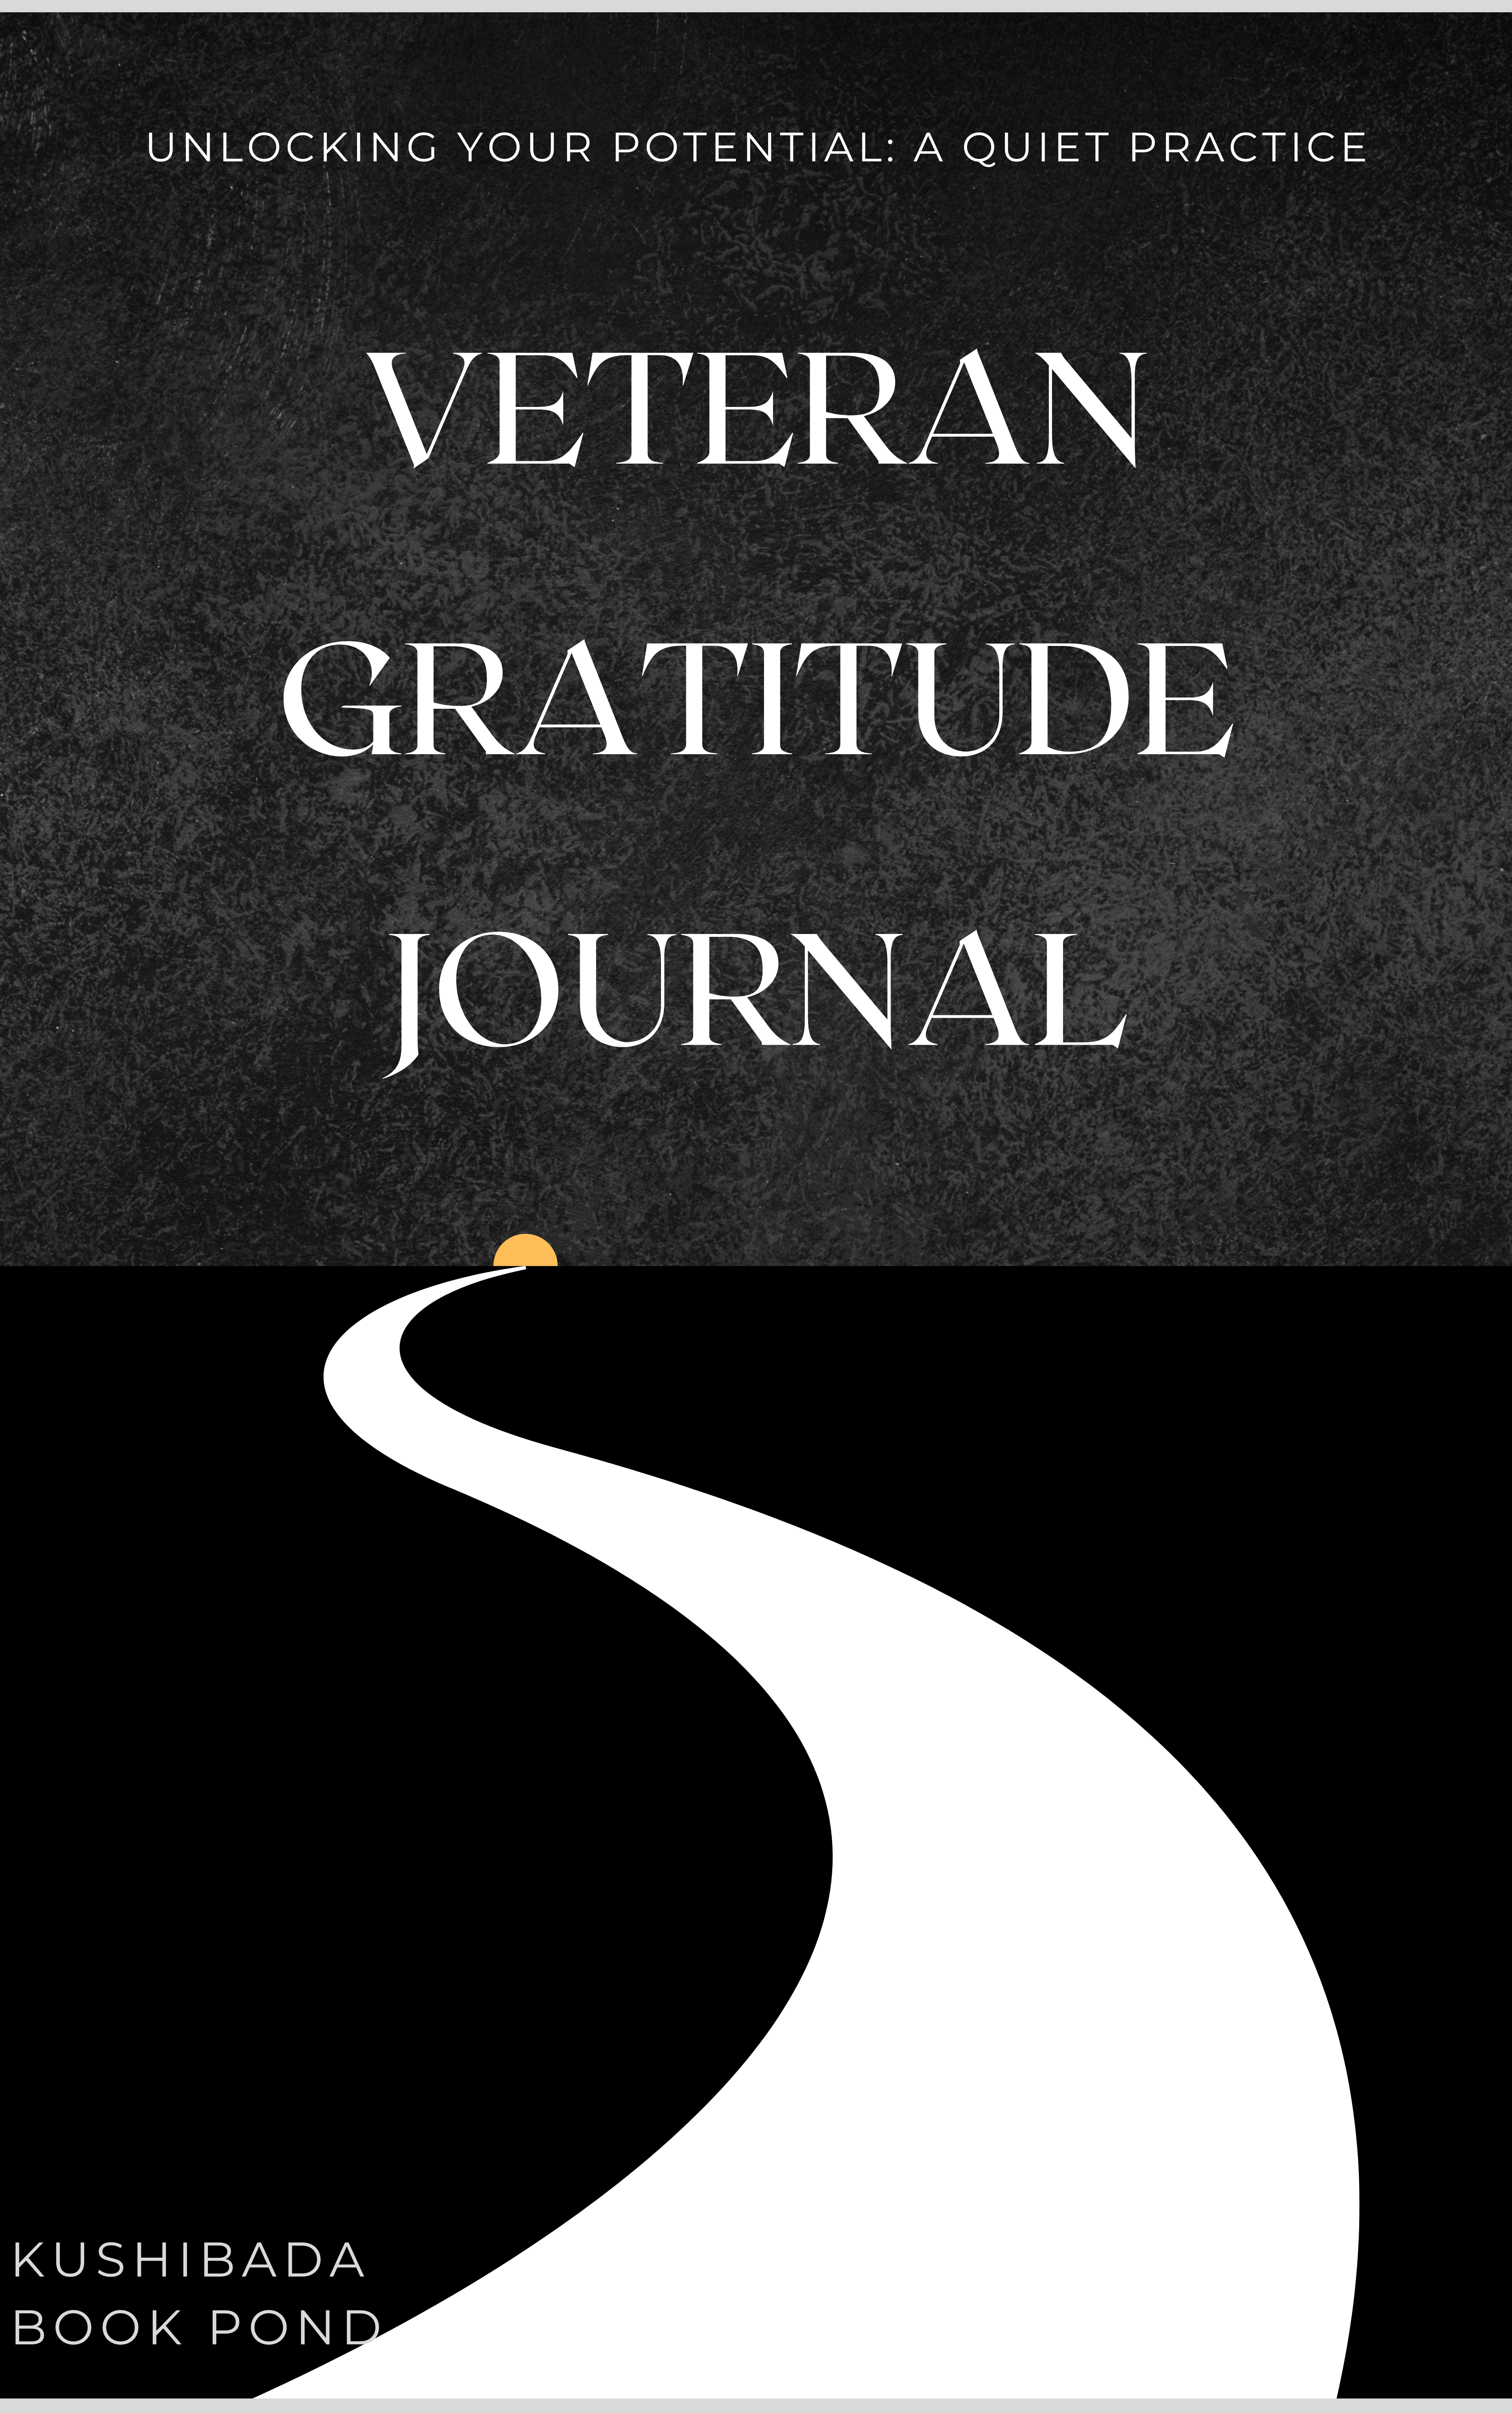 Veteran Gratitude Journal - 6x9 Inches, 110 Pages | Daily Prompts for Veterans' Reflection and Appreciation